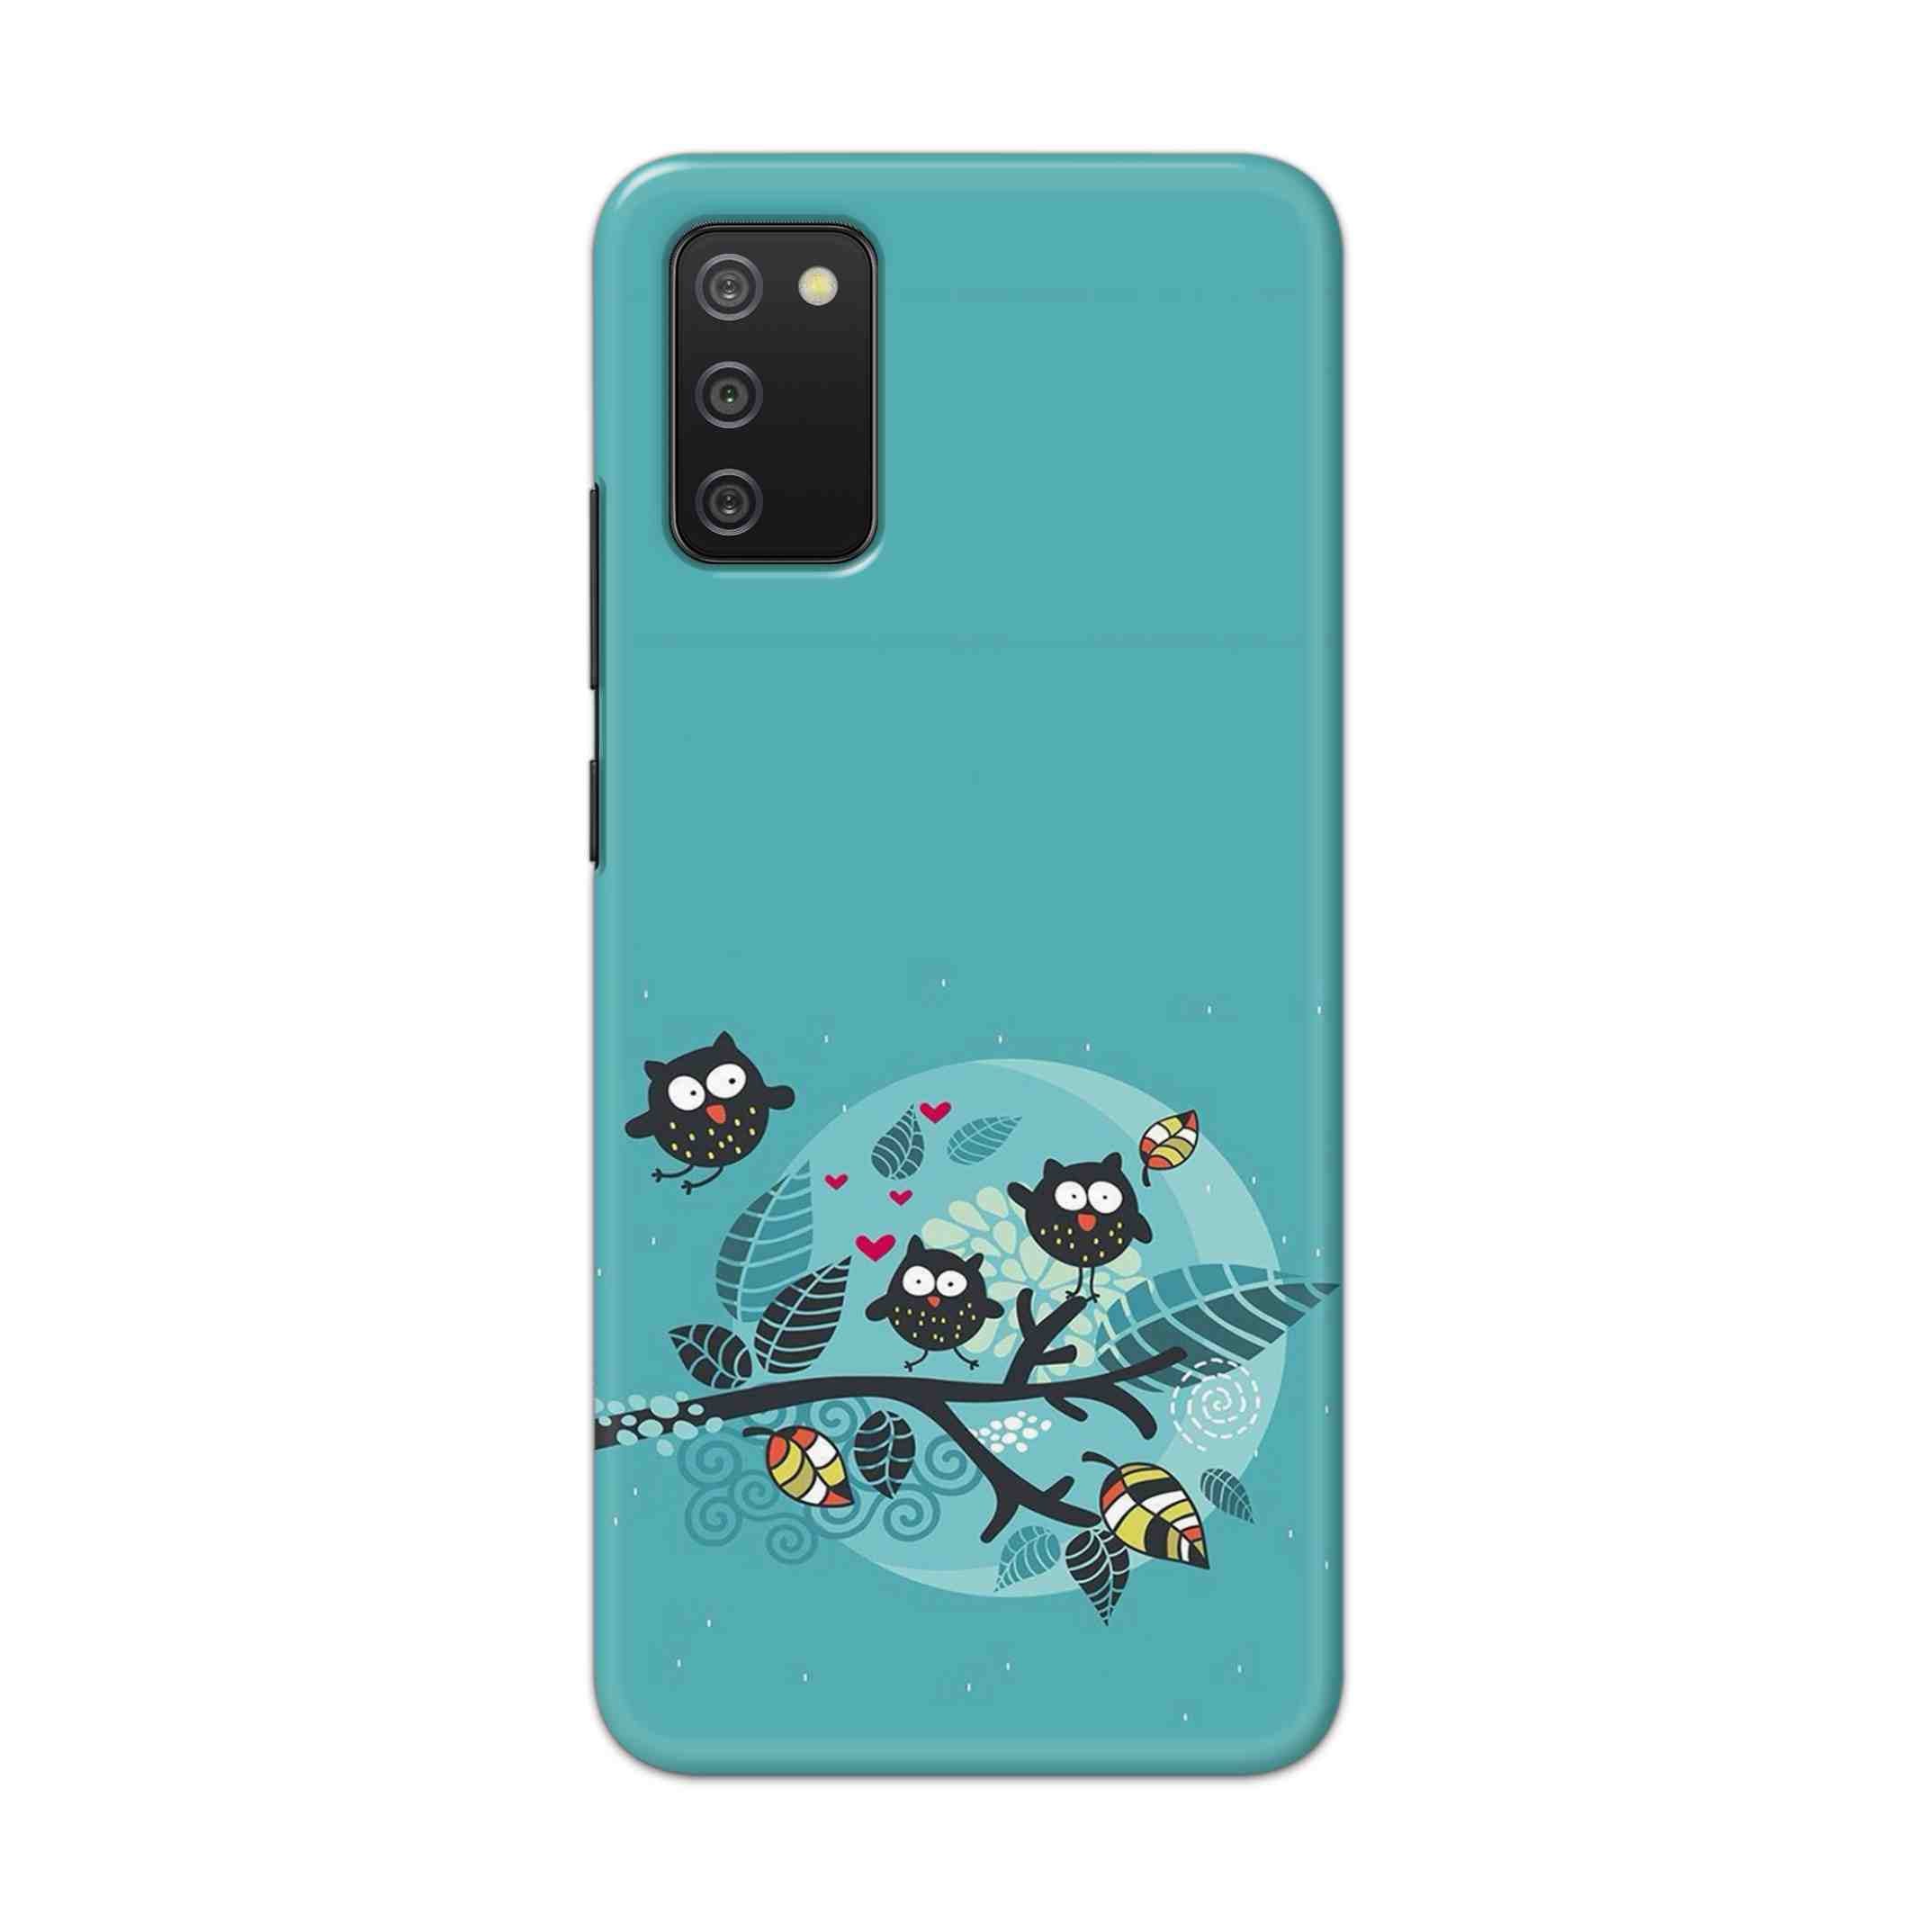 Buy Owl Hard Back Mobile Phone Case Cover For Samsung Galaxy M02s Online